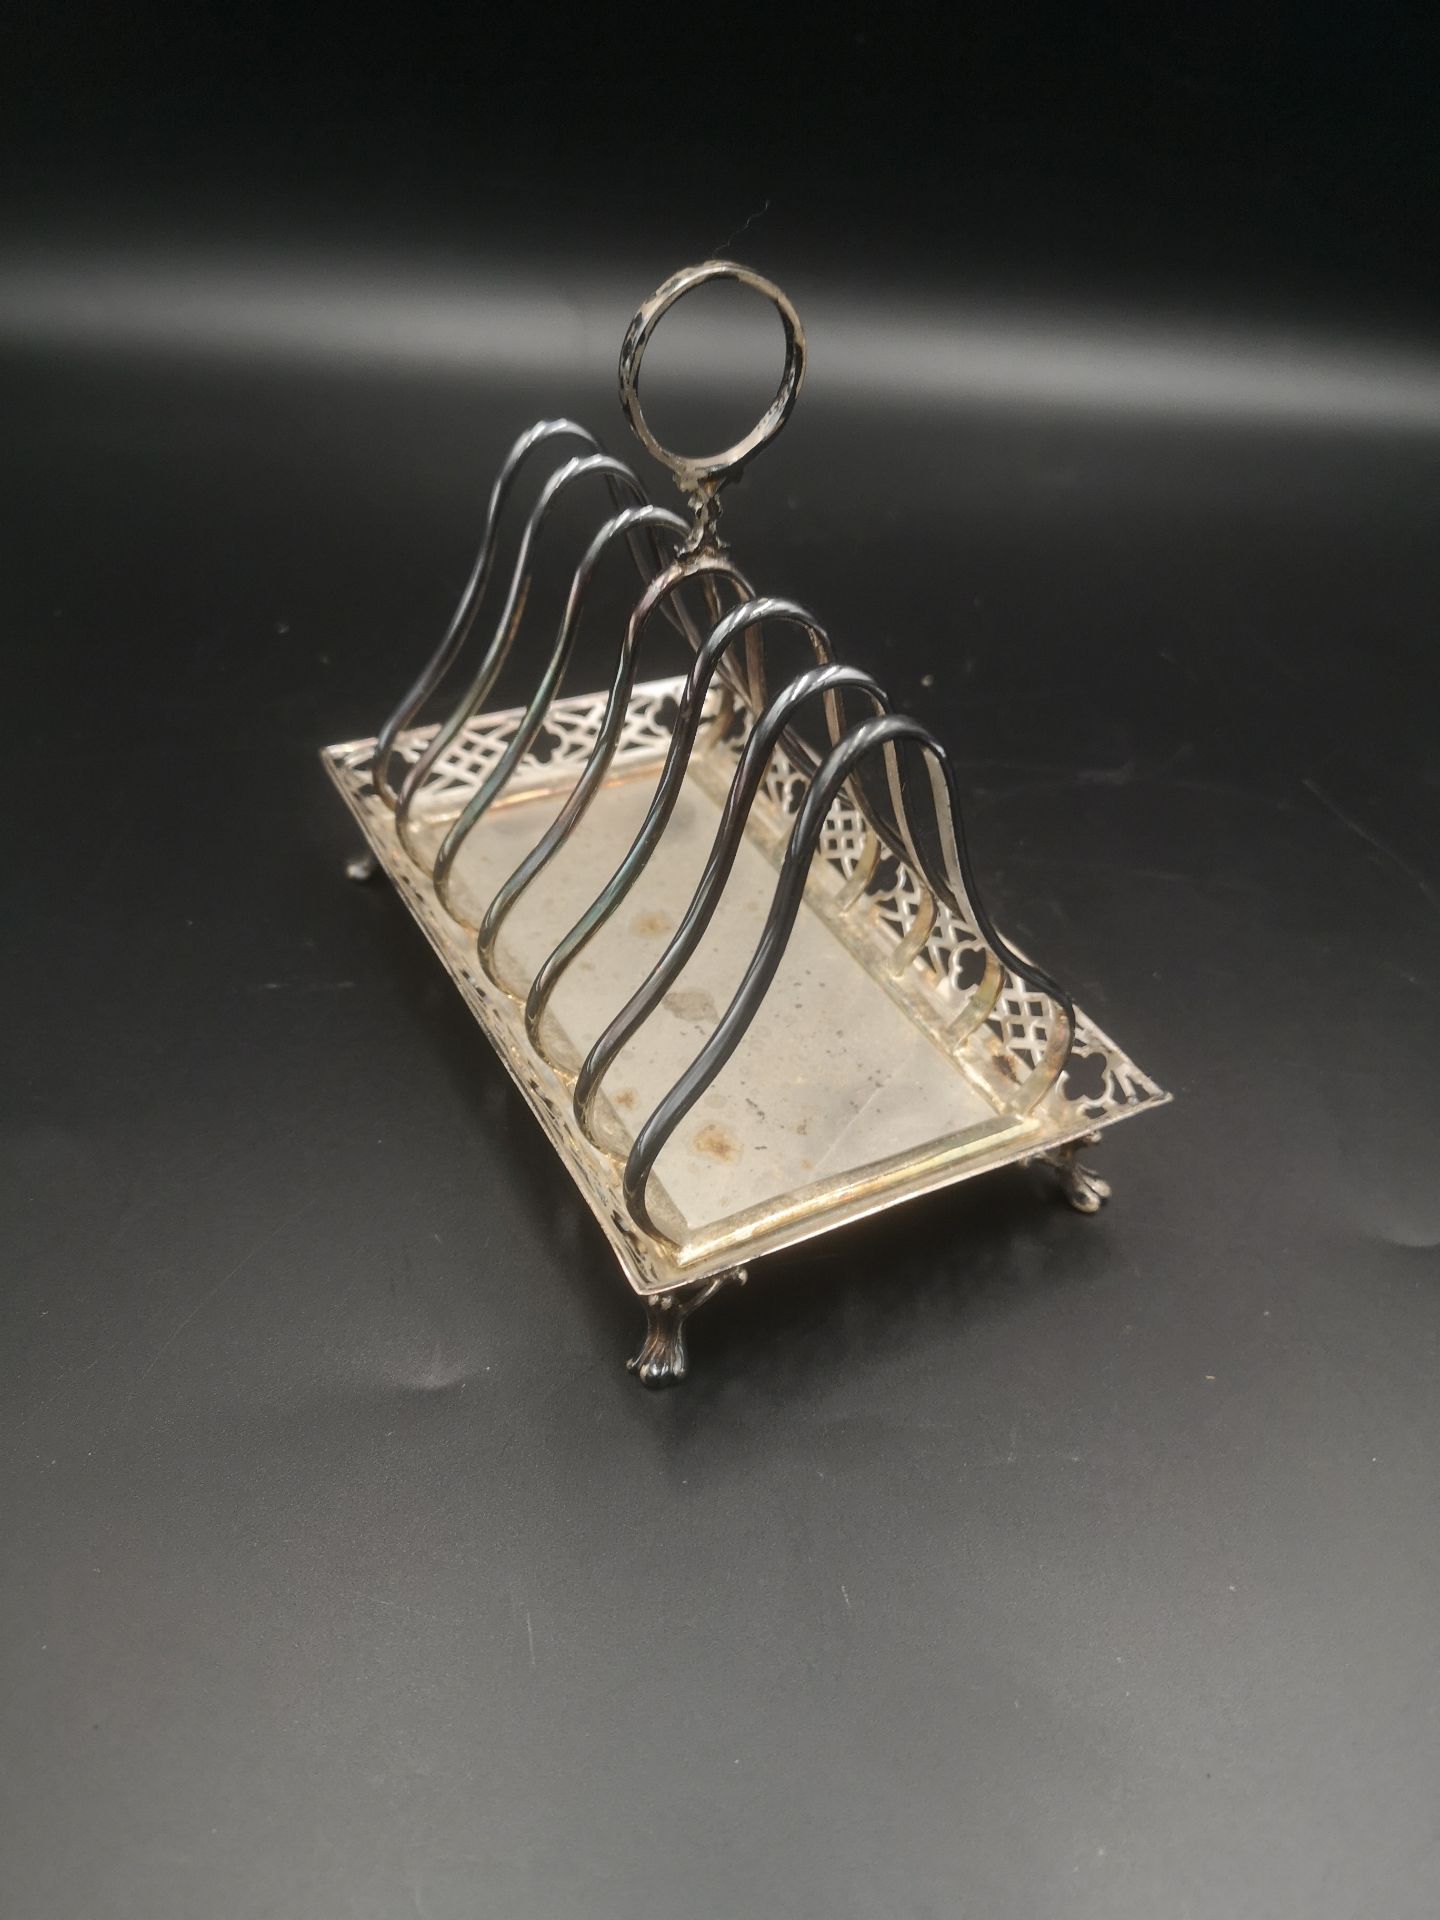 Goldsmith and Silversmith Co. silver toast rack, 1911 - Image 2 of 5